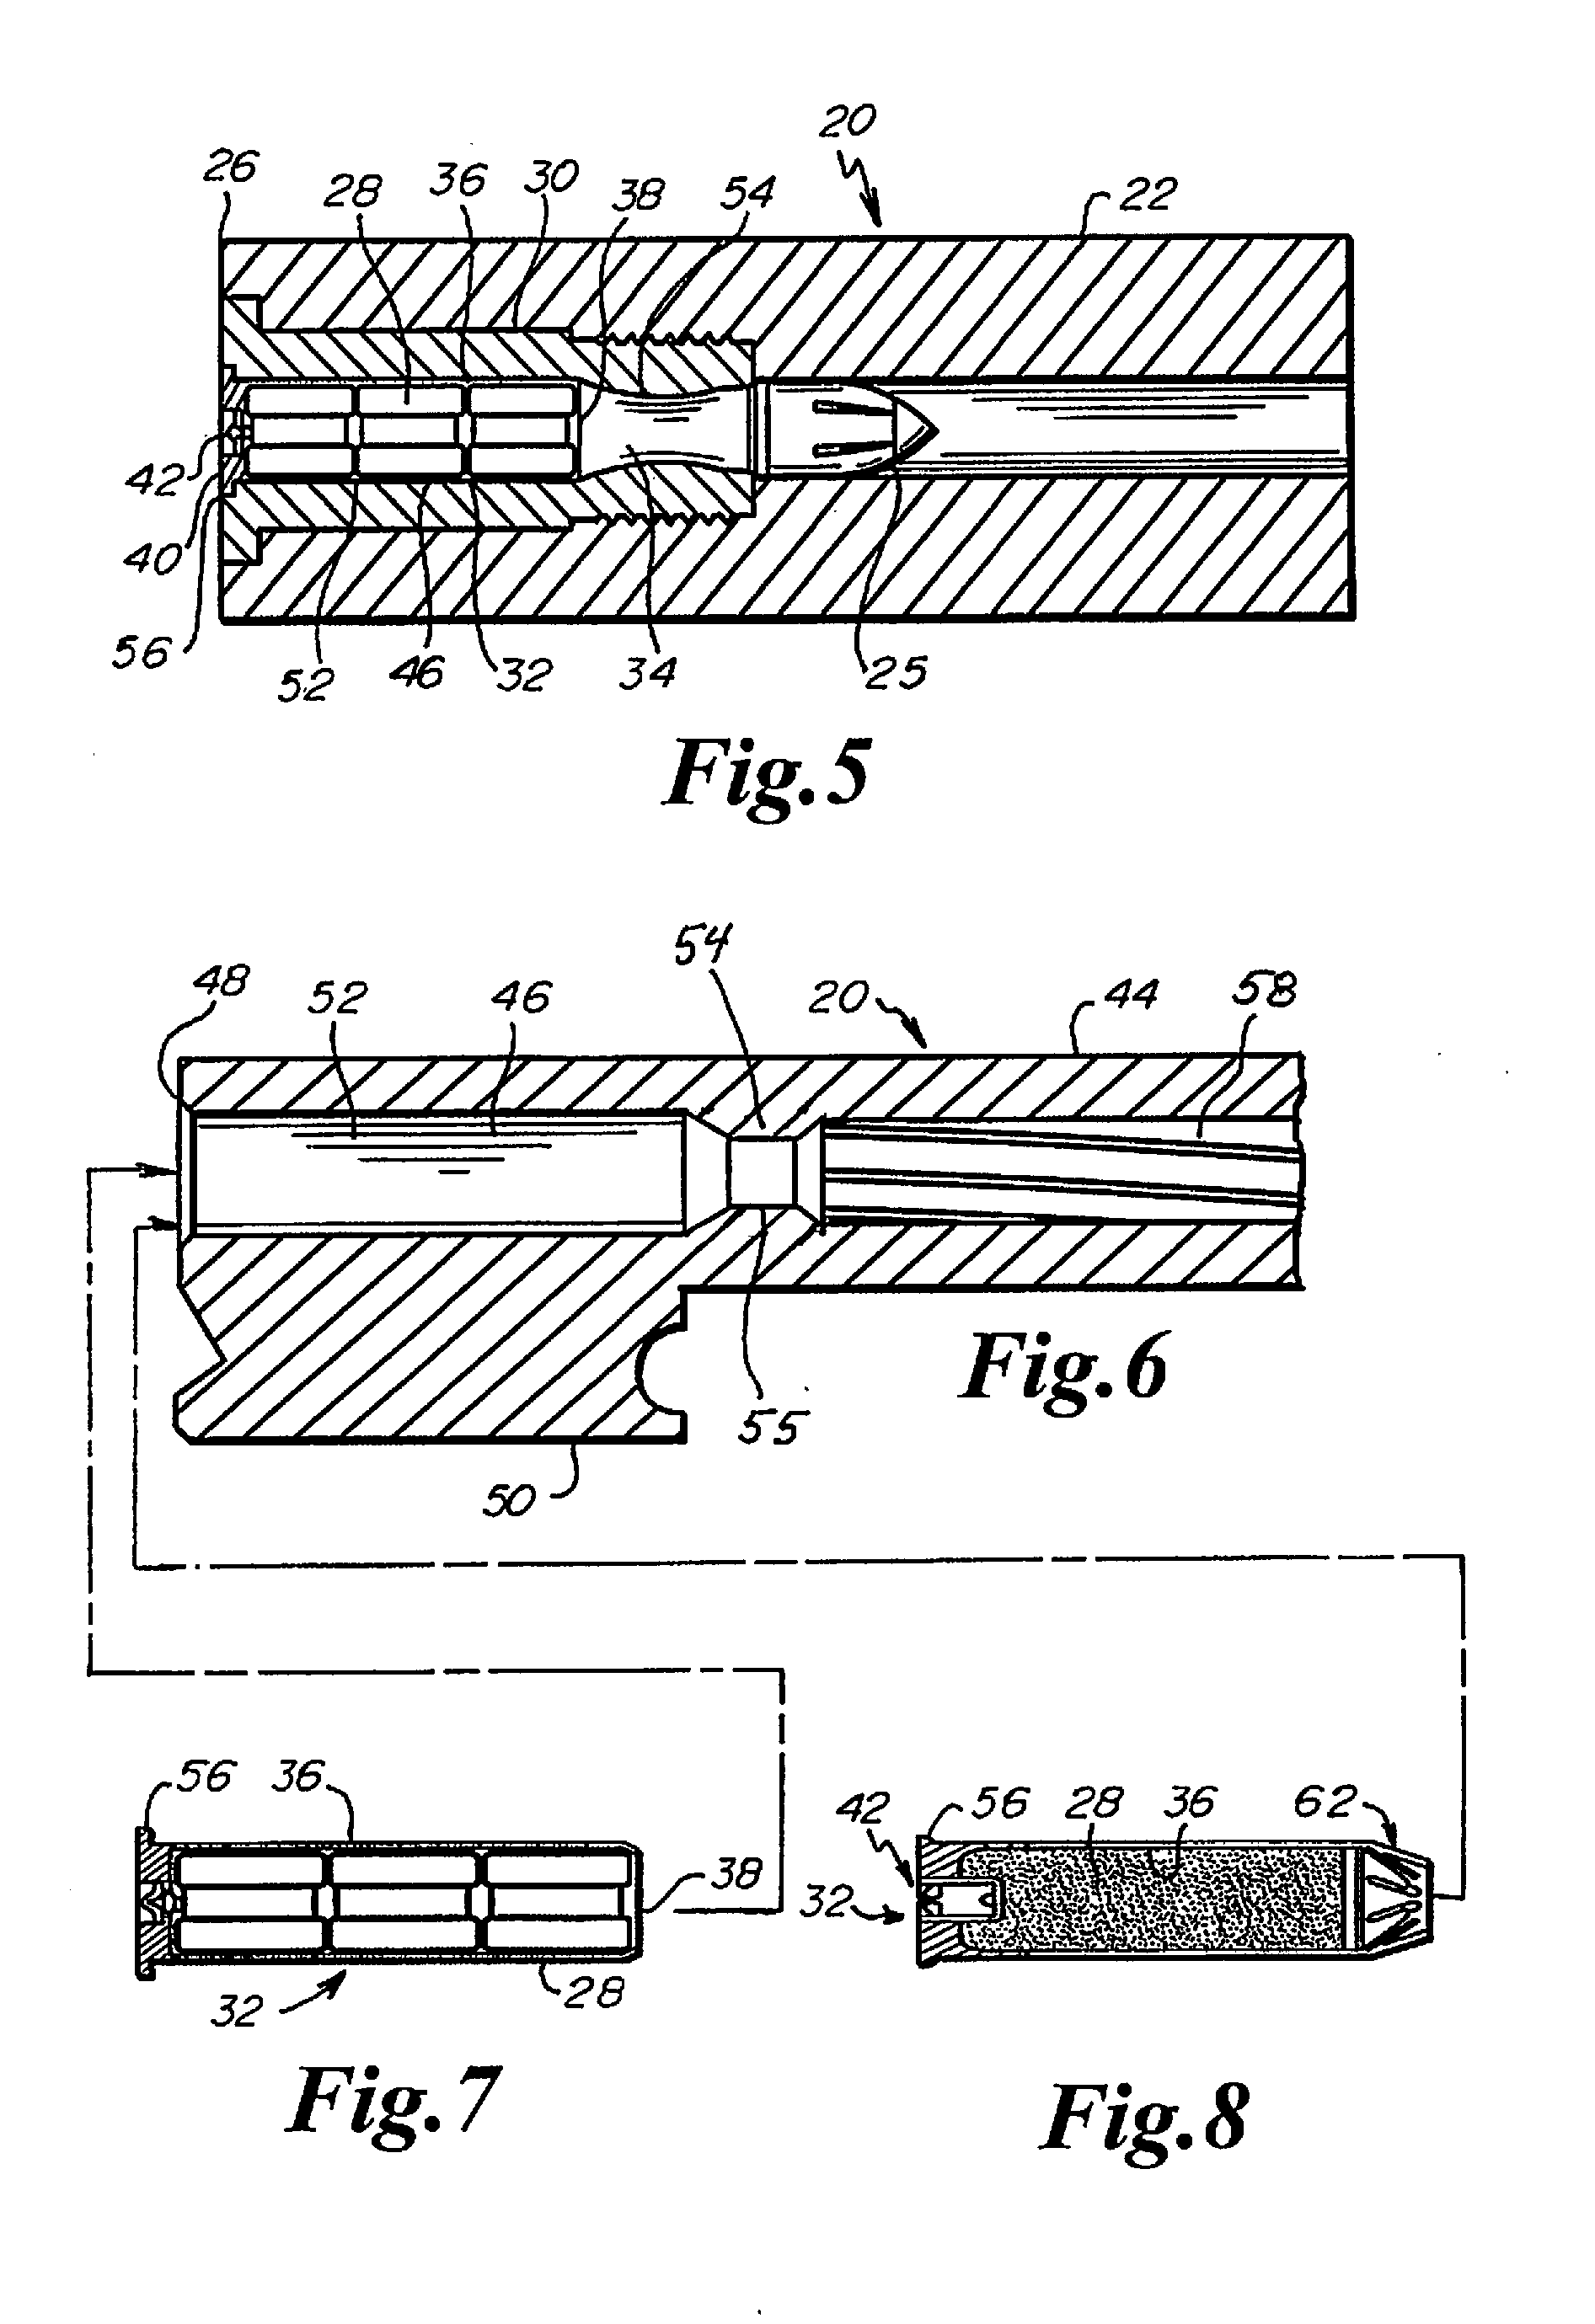 Muzzleloader and propellant system